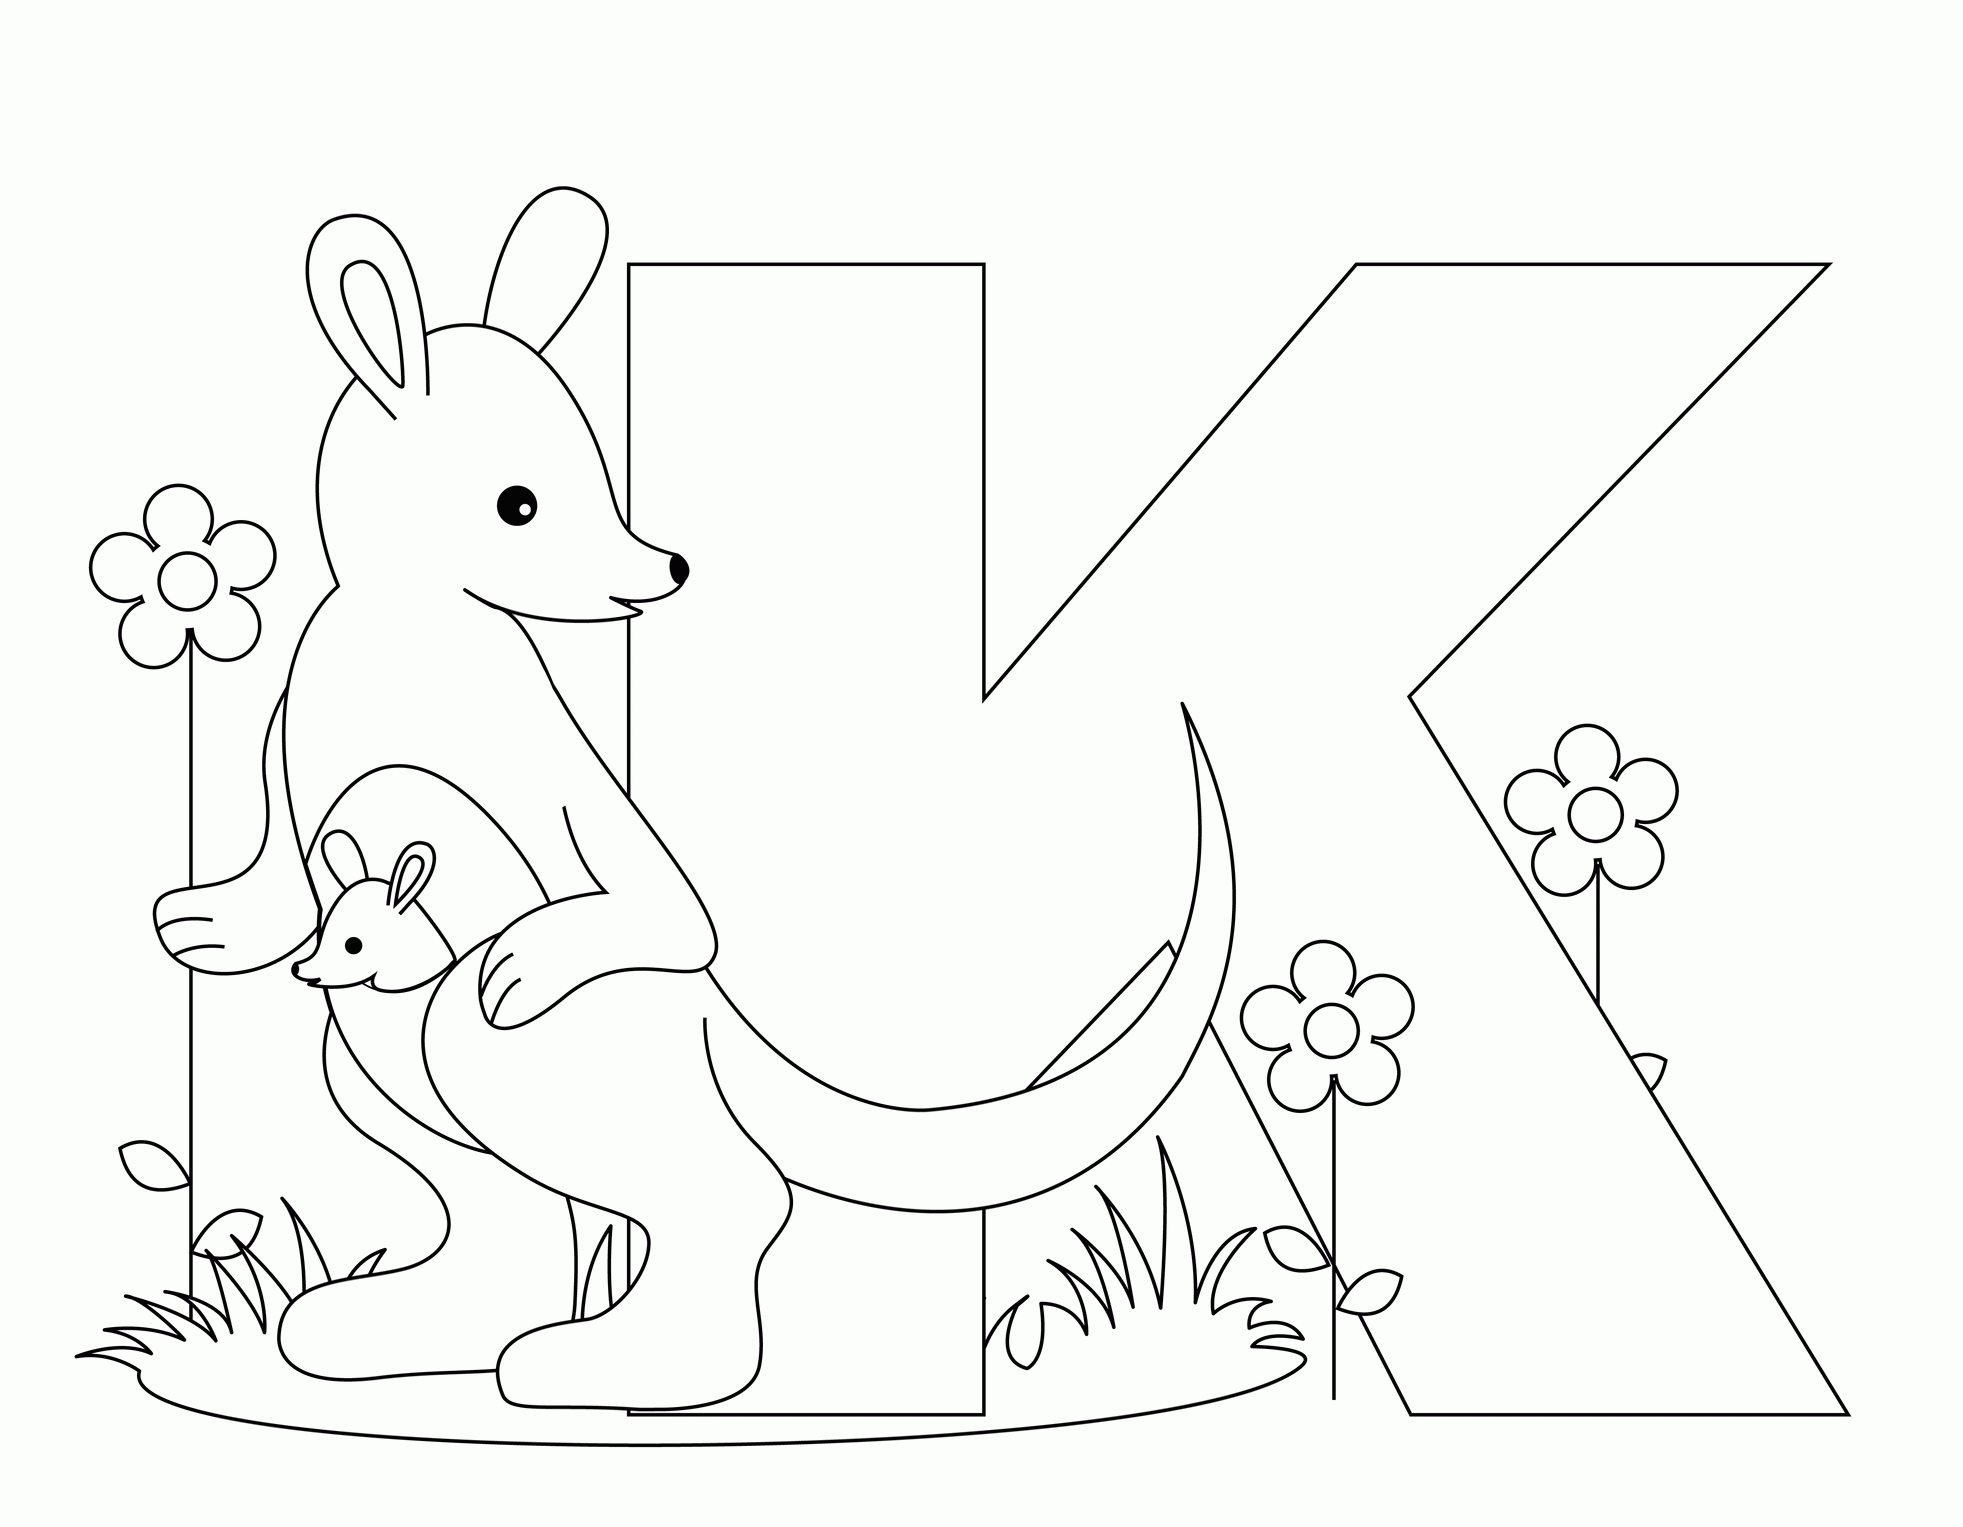 Letter K Coloring Page Coloring Home